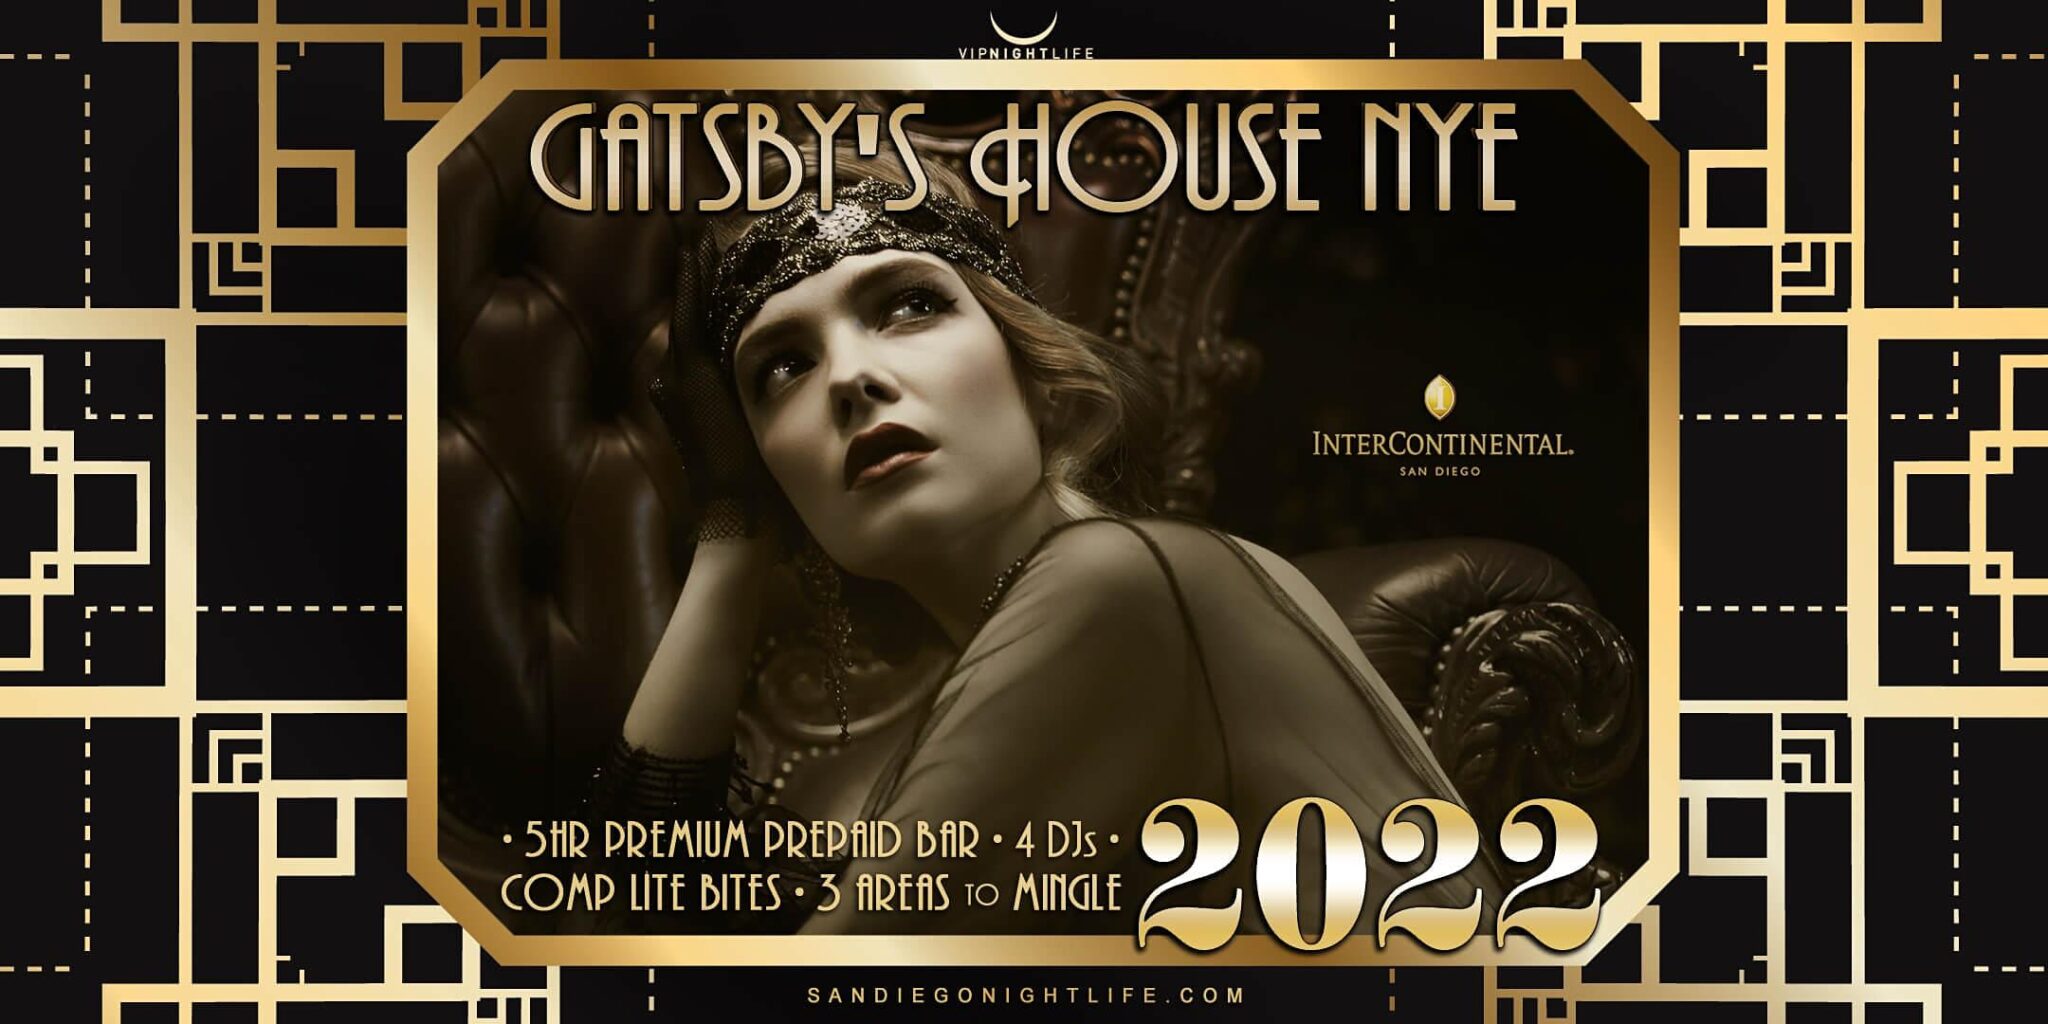 2022 InterContinental San Diego New Year's Eve Party Gatsby's House